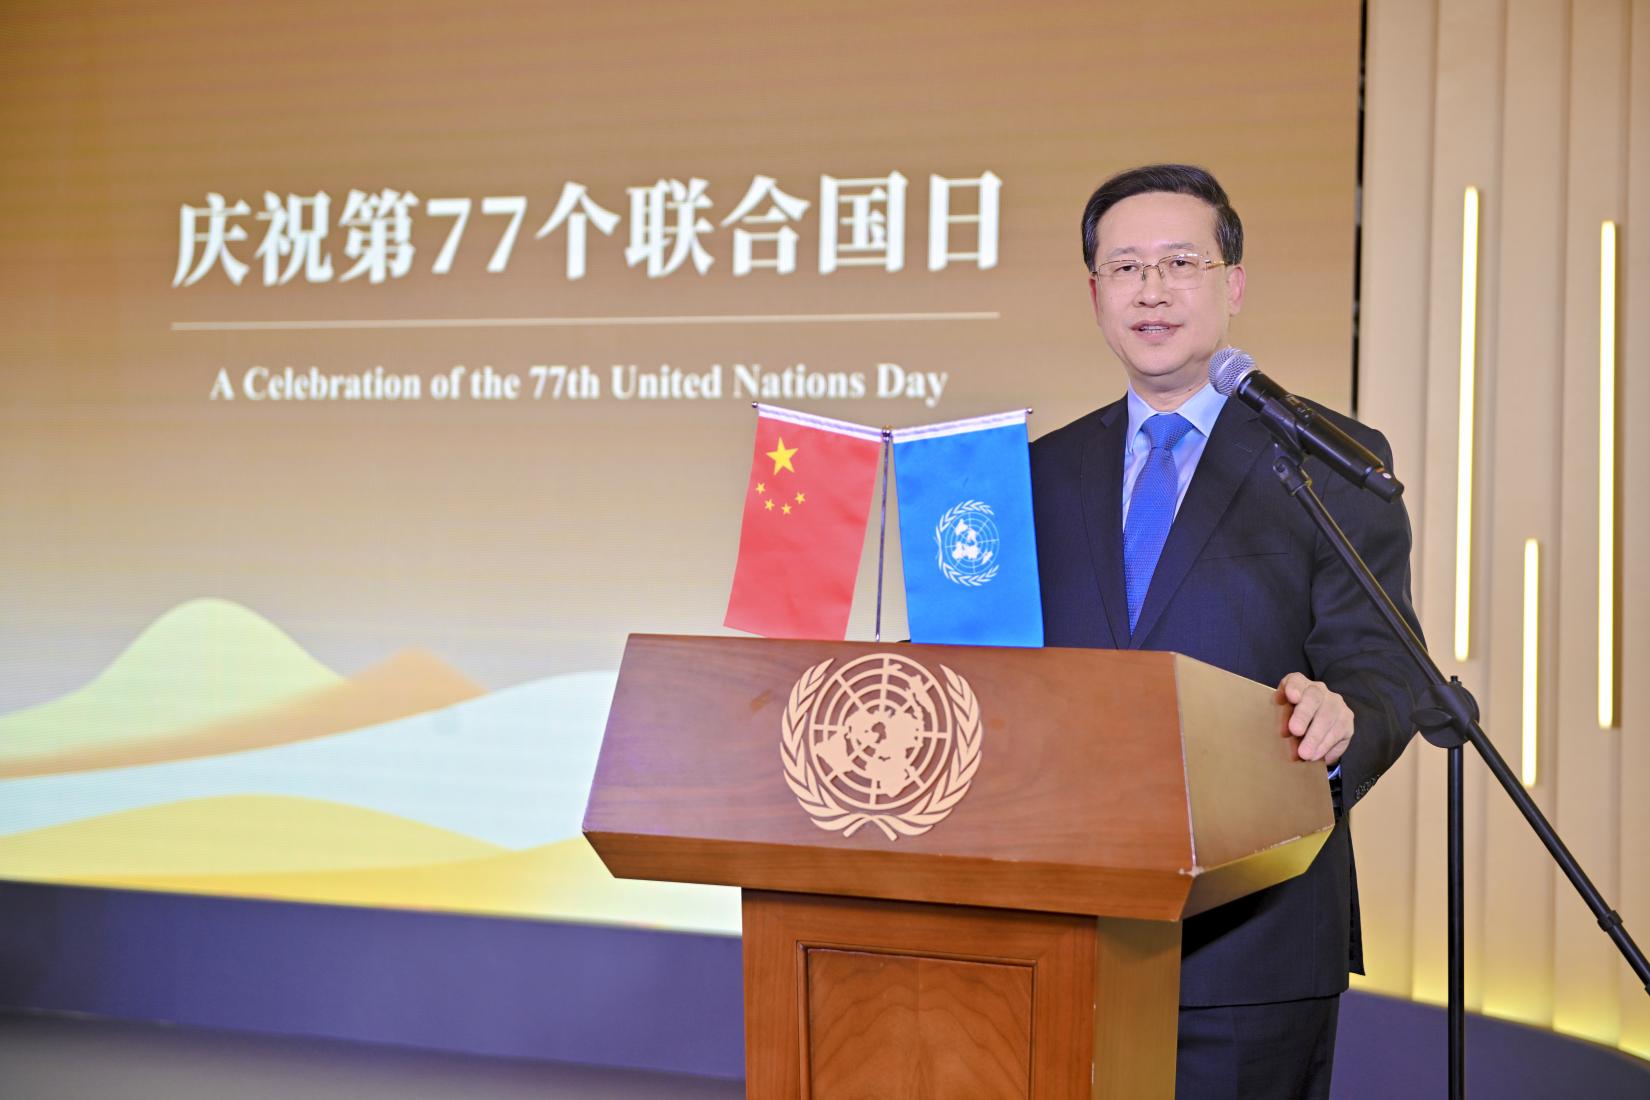 Ma Zhaoxu, Vice-Minister of Foreign Affairs for the People’s Republic of China